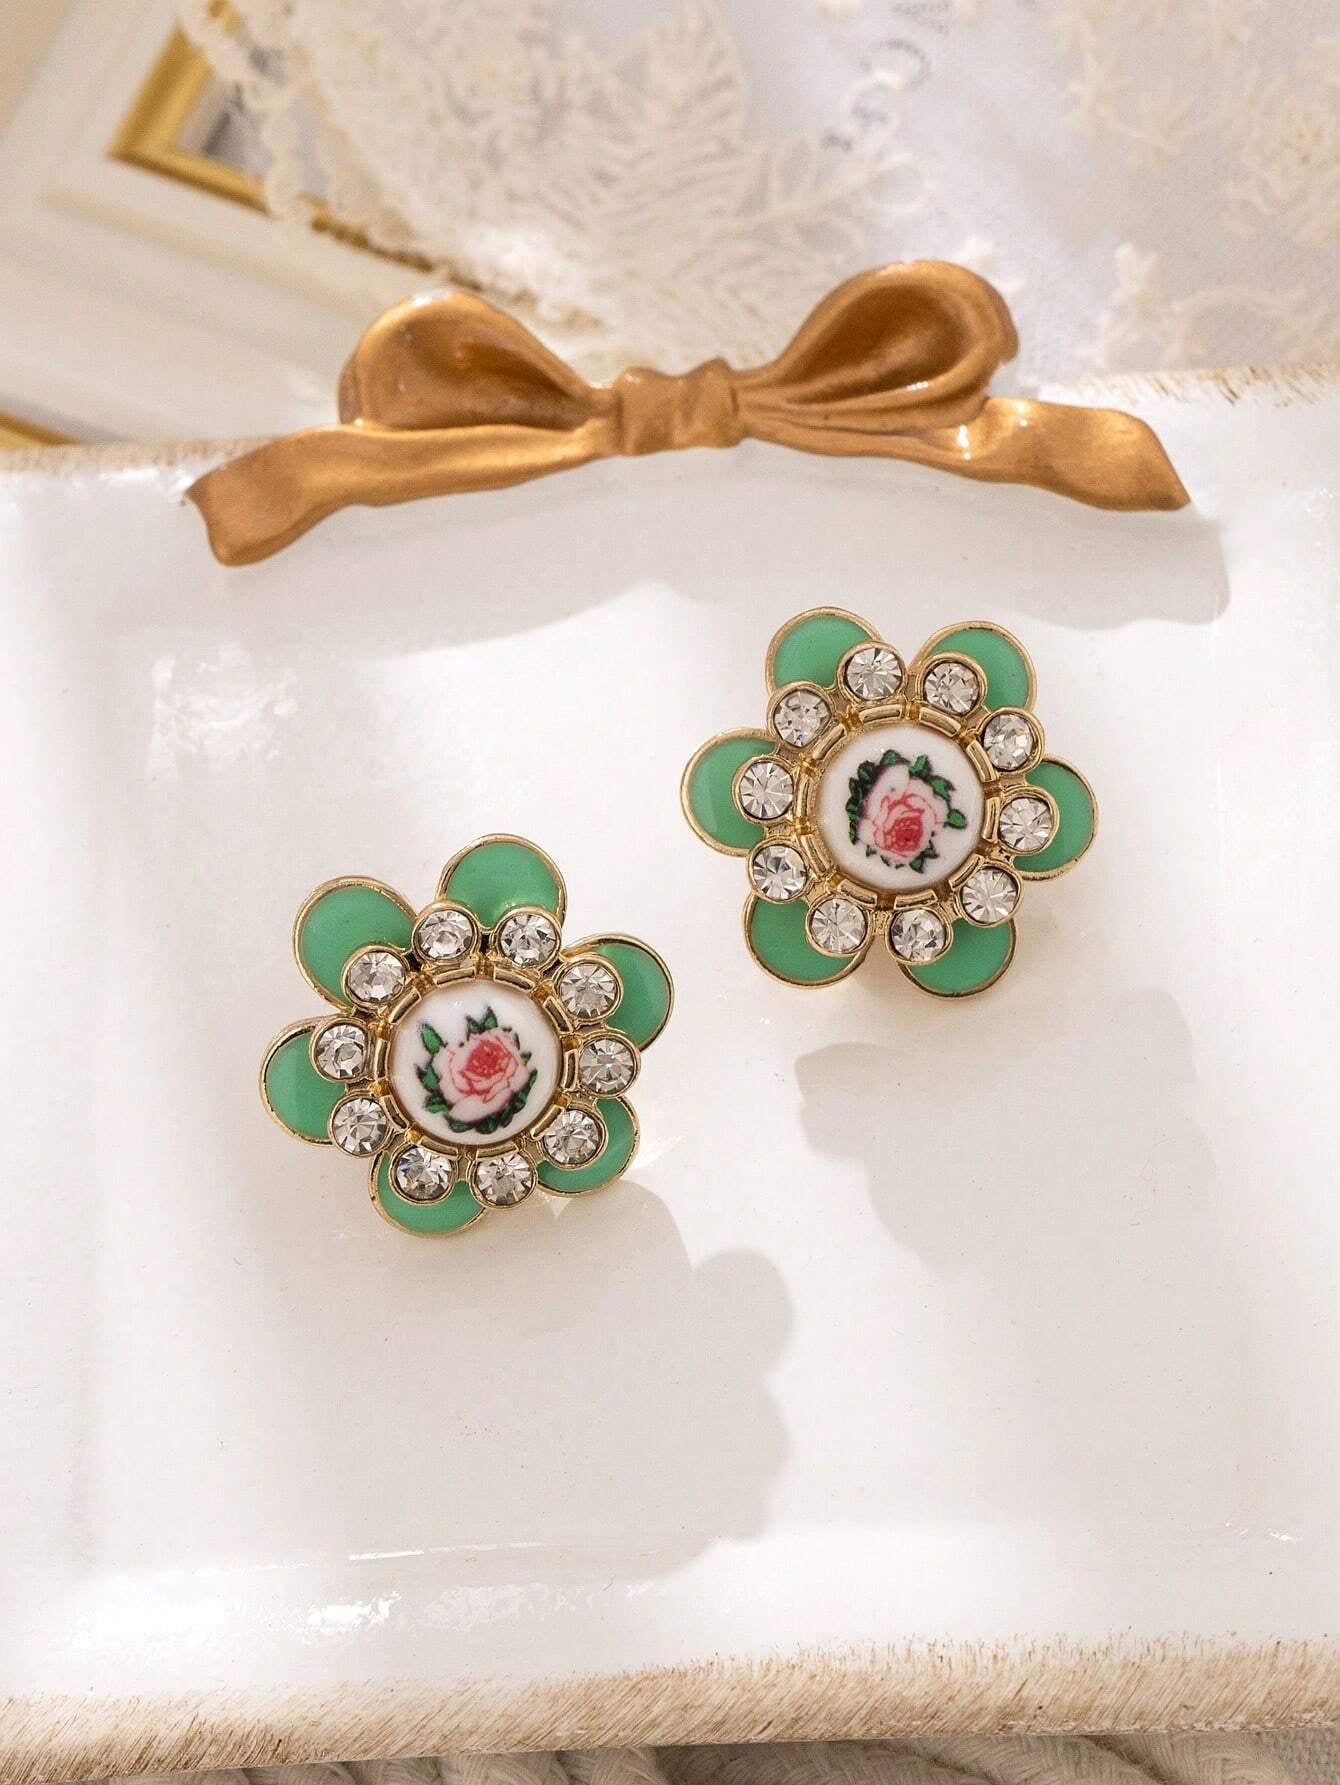 Pair of Hand-Painted European Style Antique Enamel Flower Clip-On Earrings, Suitable for Daily Wear and Festival Events.